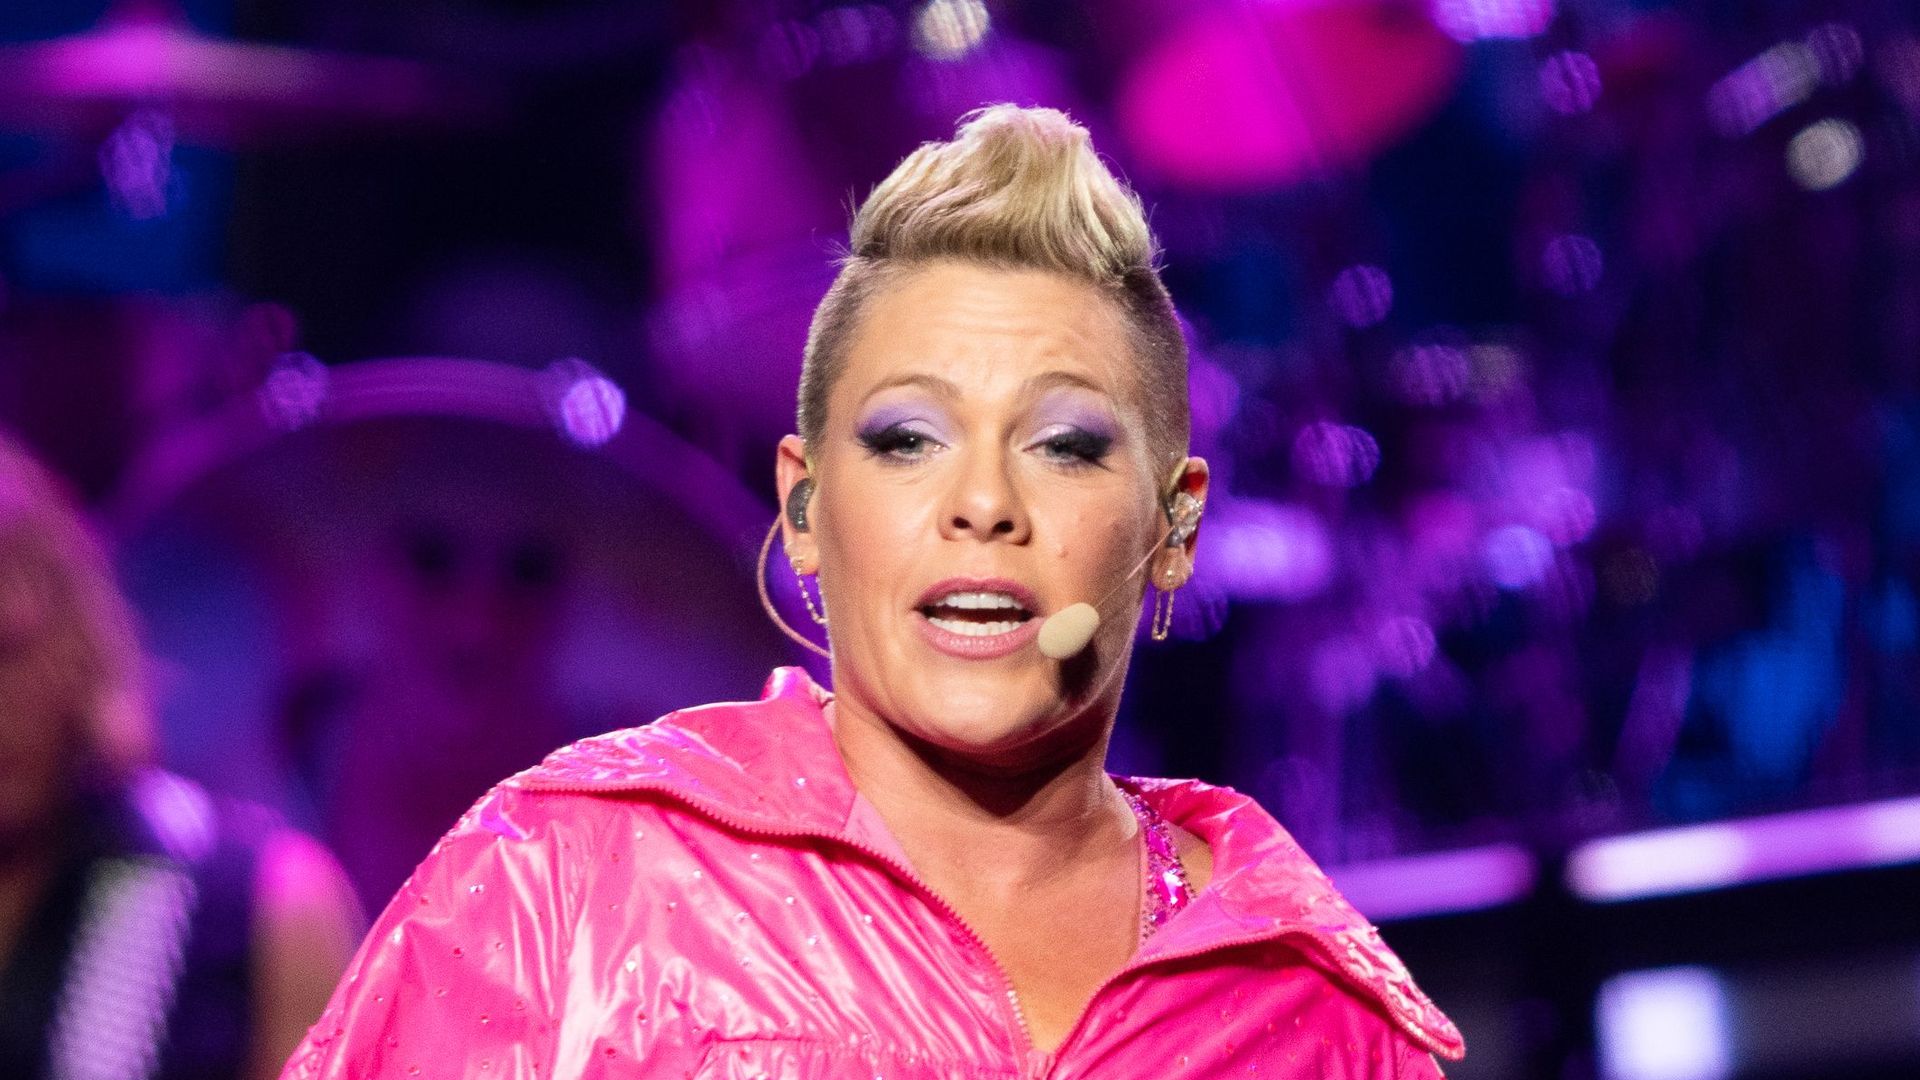 Pink in concert on the 'Trustfall Tour', New York, wearing a pink jacket